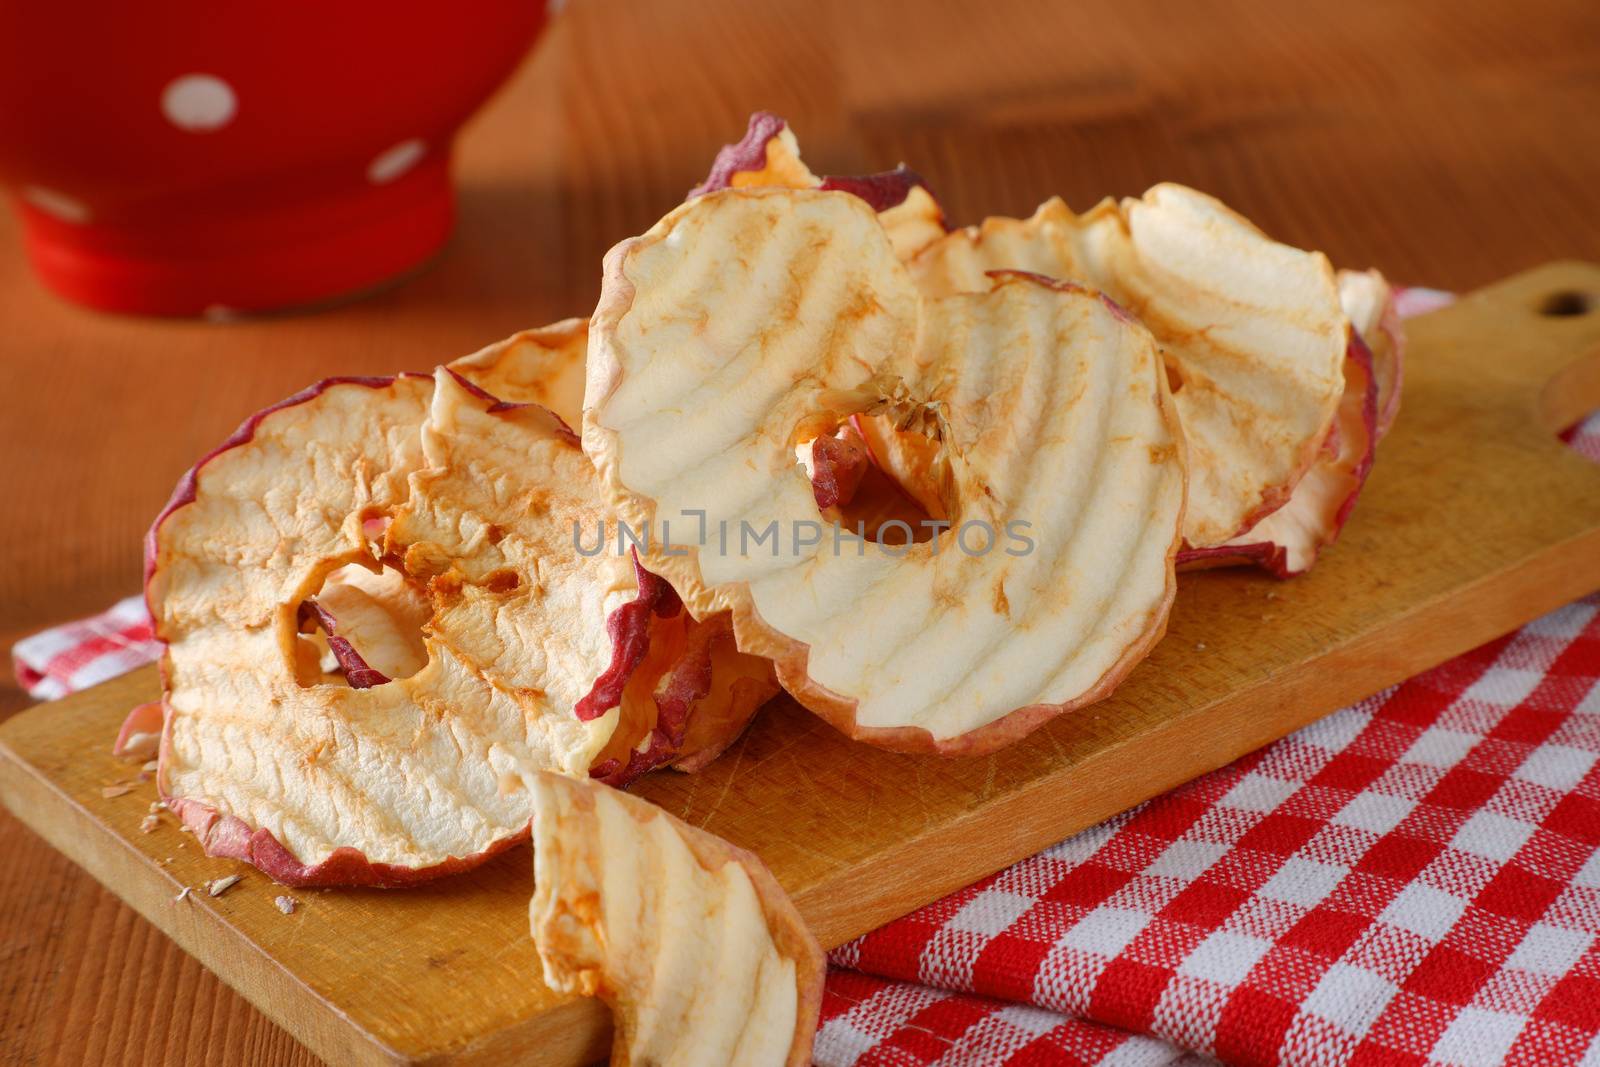 Dried apple slices by Digifoodstock